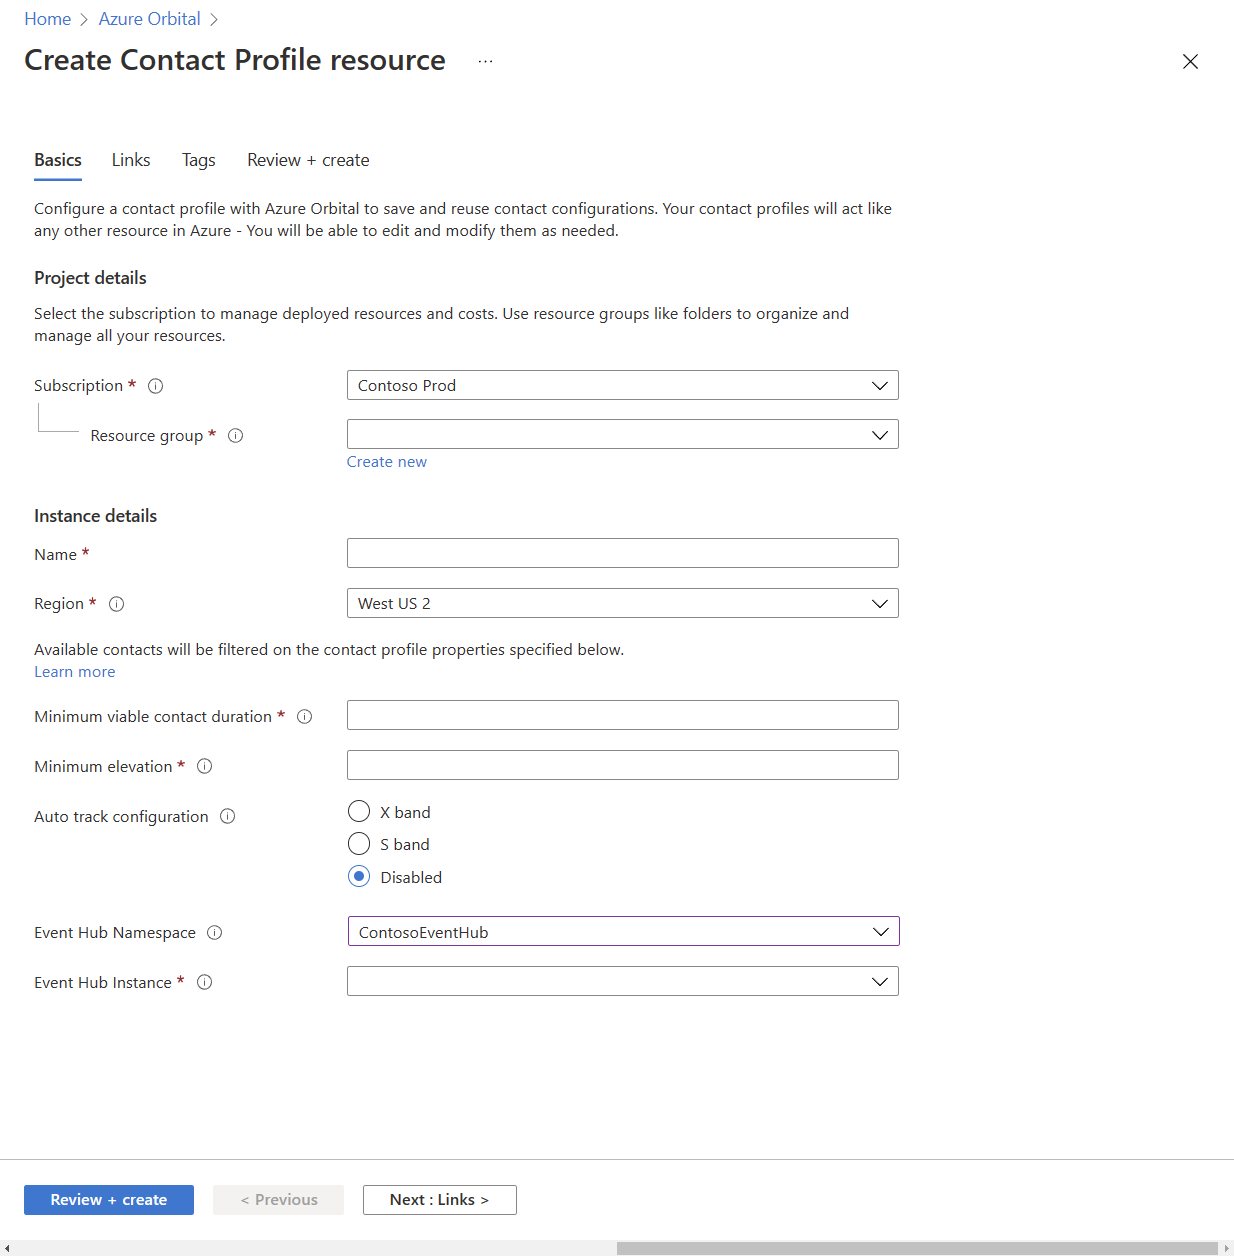 Screenshot of the Create a Contact Profile resource page on the basics tab. There are blank fields you need to fill out for the project details and instance details.